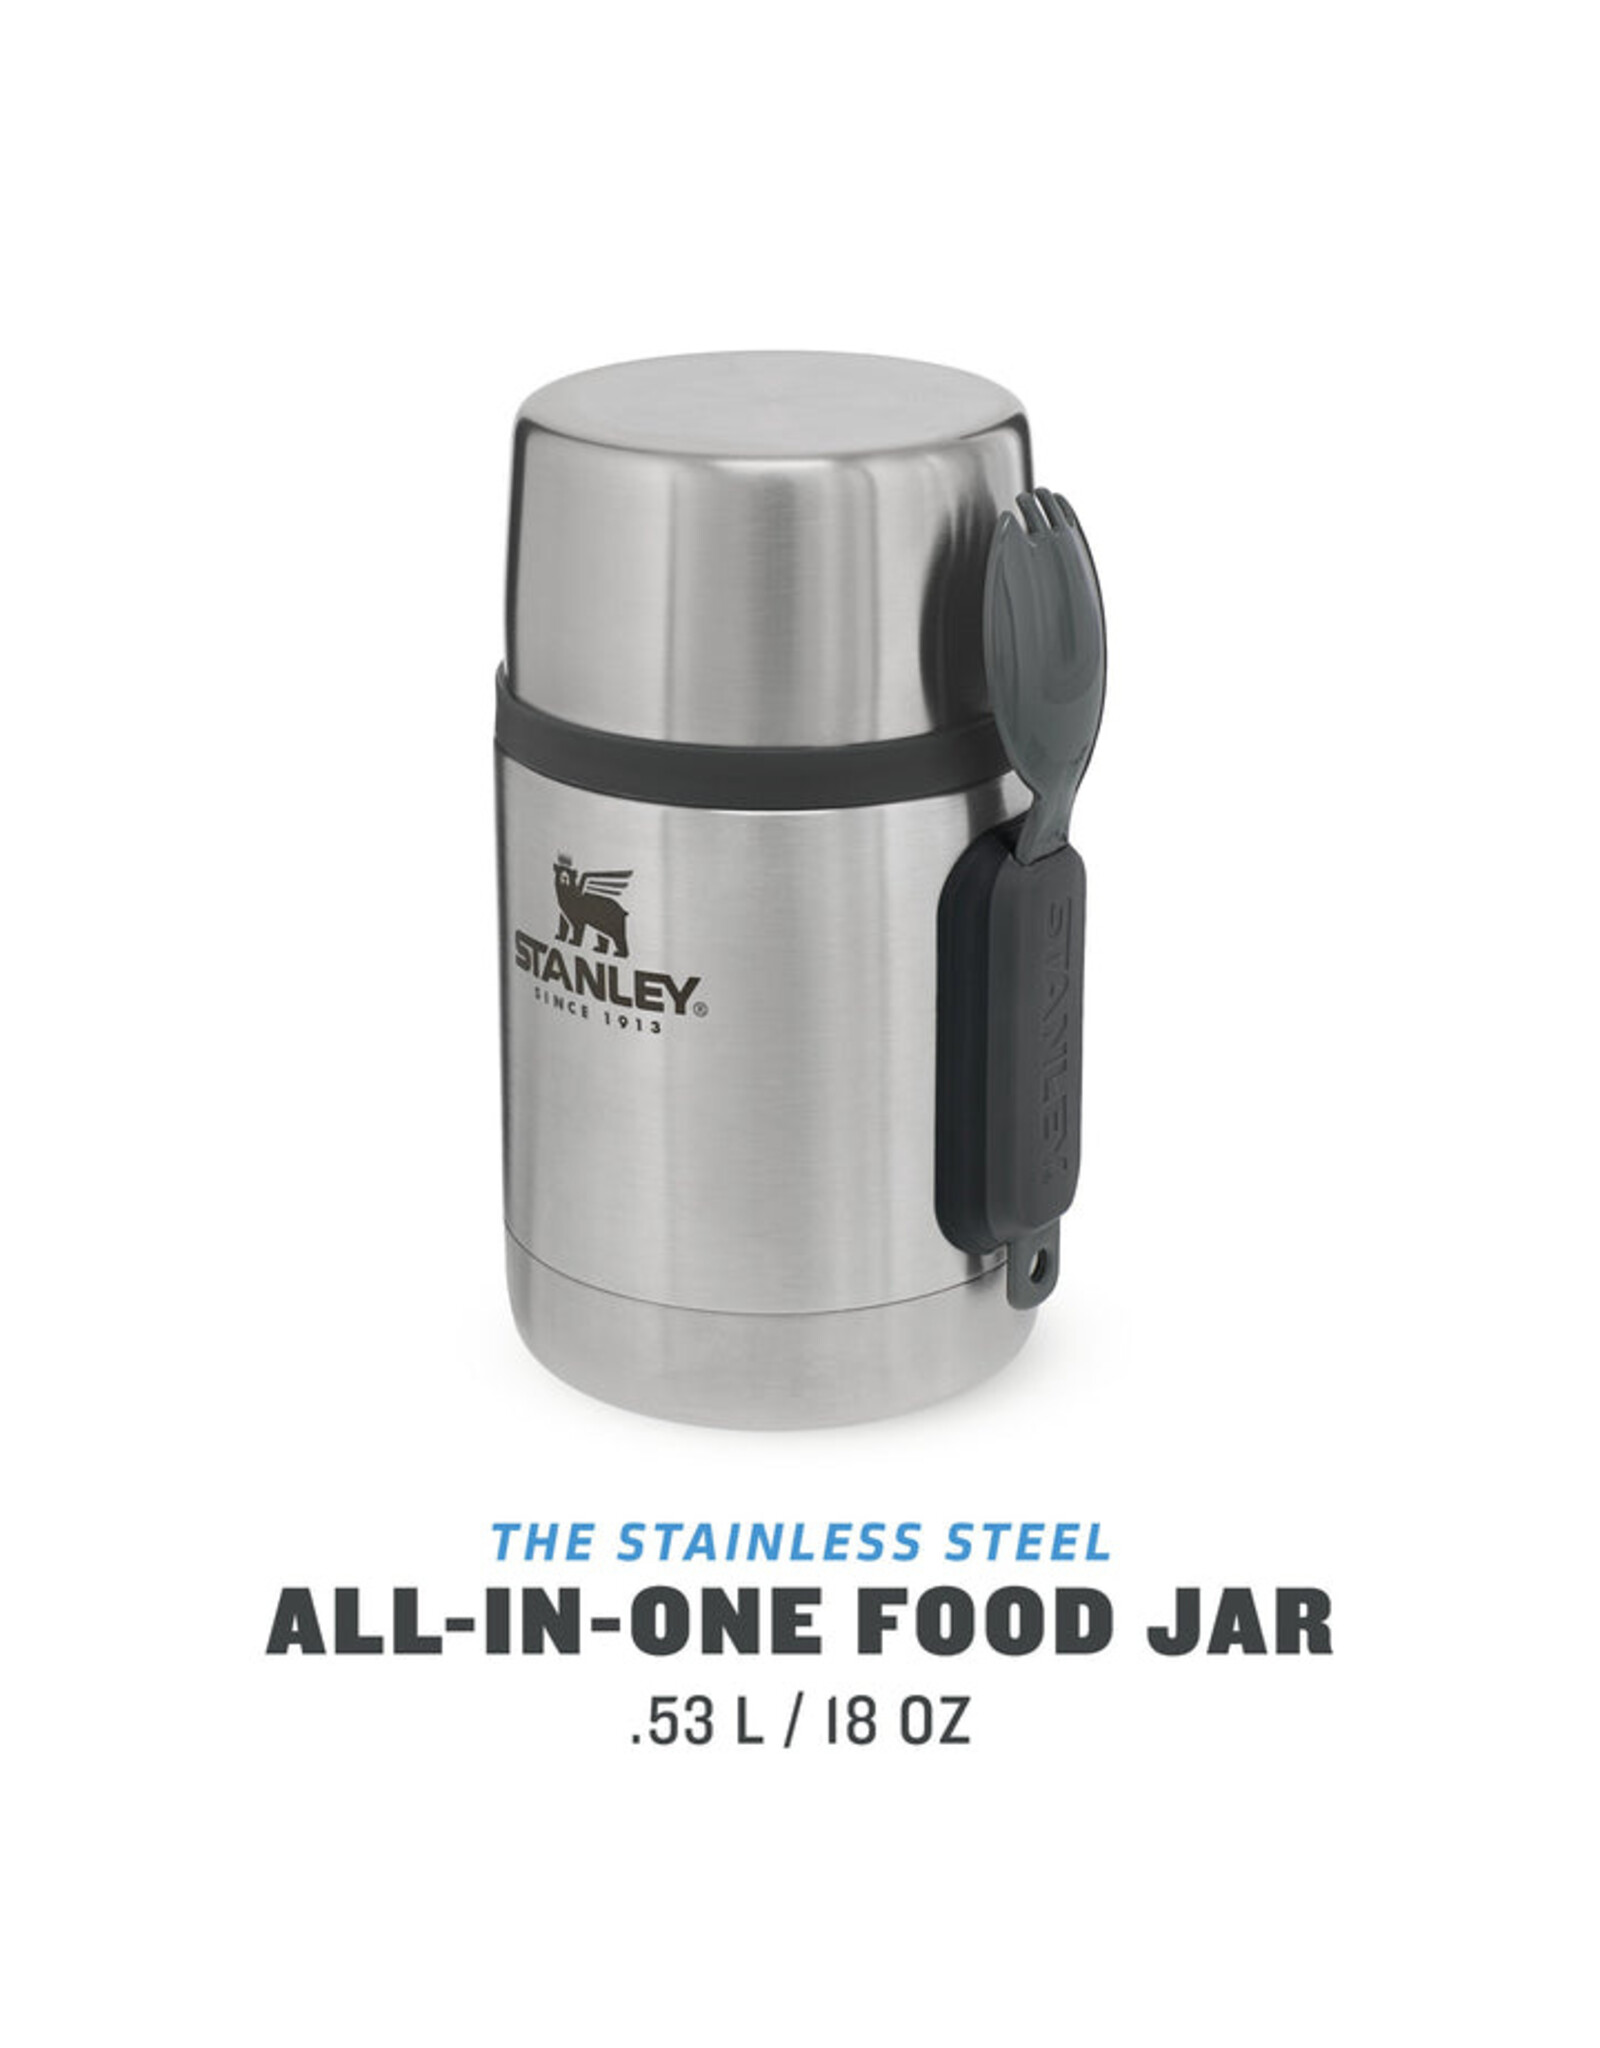 Stanley Food Jar All-in-One The Stainless Steel 0.53L